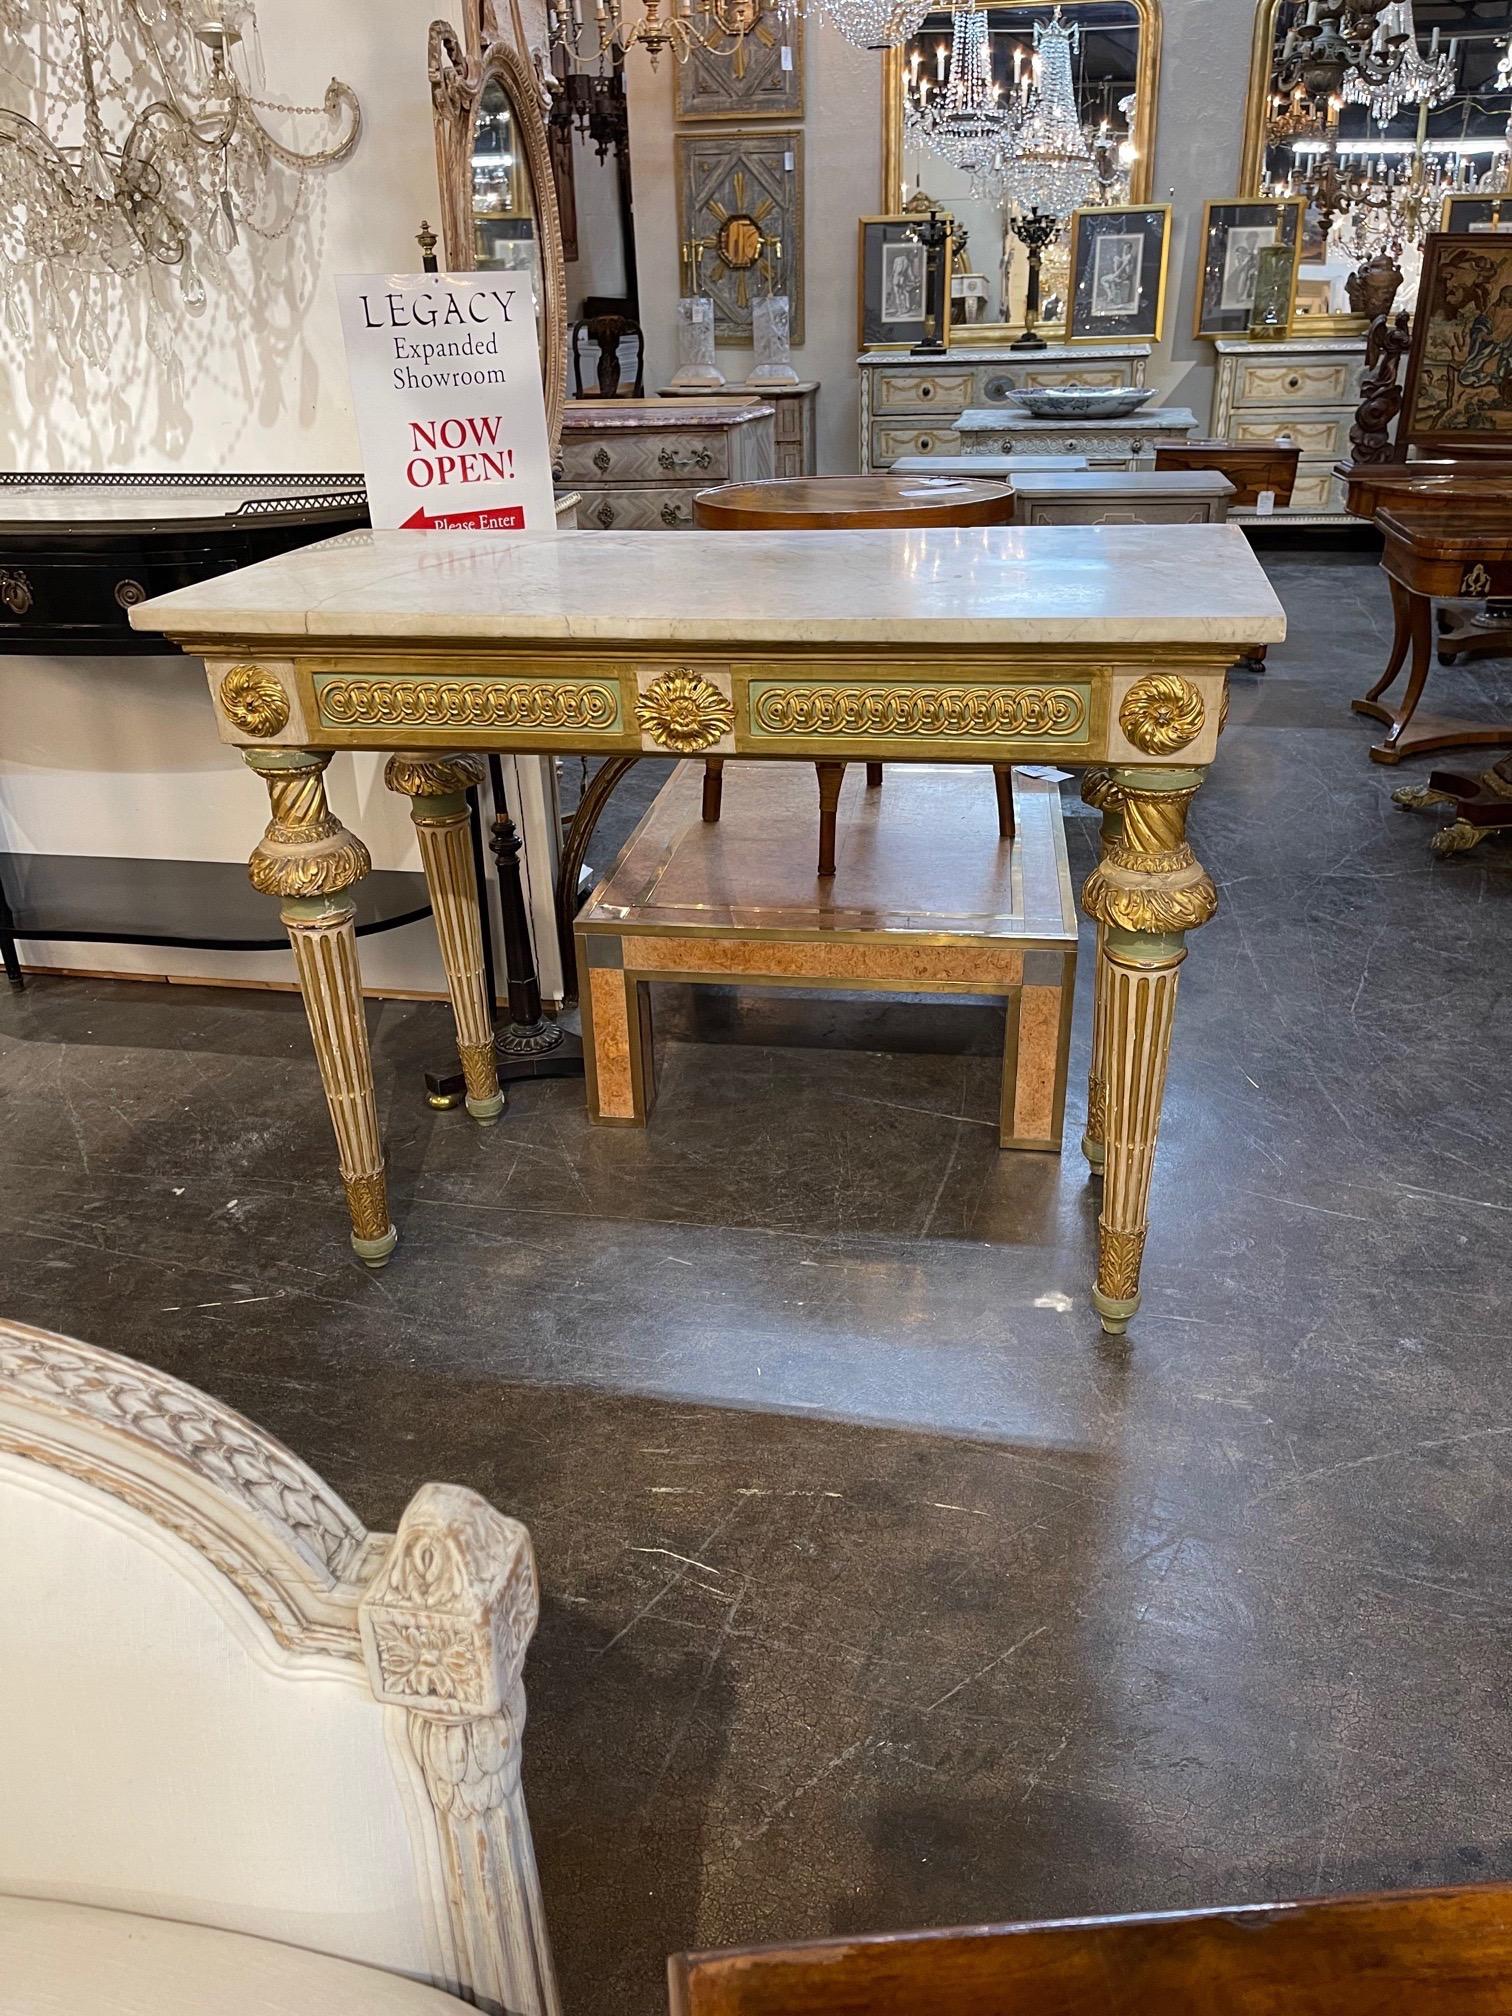 Fabulous 18th century Italian carved and parcel gilt console from Sicily. Very Fine intricate carvings on this piece along with a beautiful marble top. Creates a very upscale look. Exquisite!